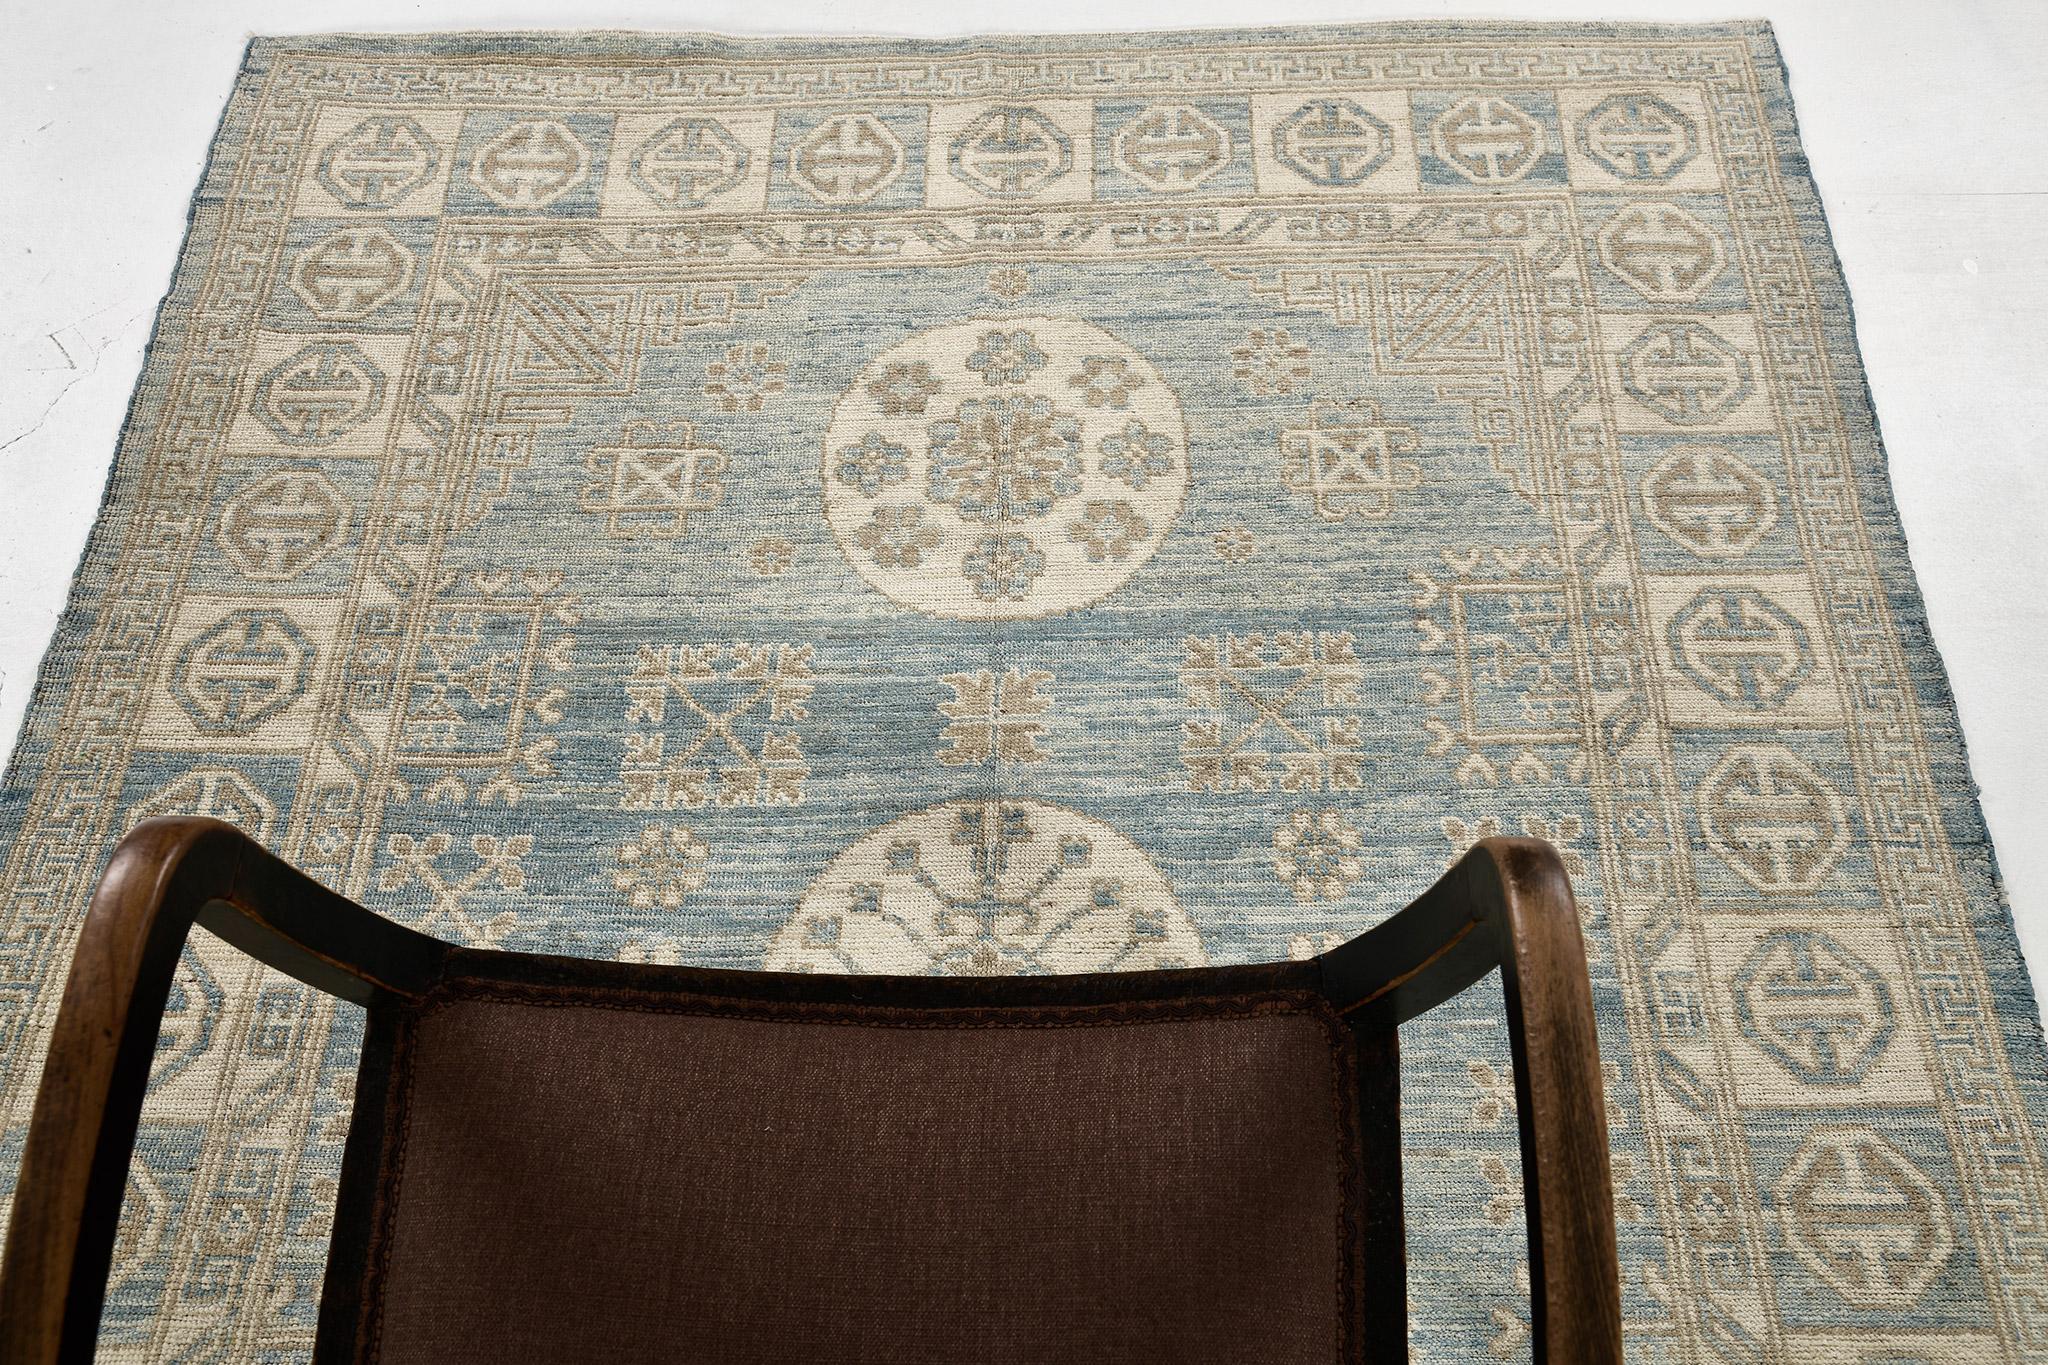 A majestic revival Khotan rug that establishes a unique character by the intricately incorporated elements and unique colour combinations. The tranquil effect by the abrashed cobalt field makes the central medallion stand out in a sublime way.